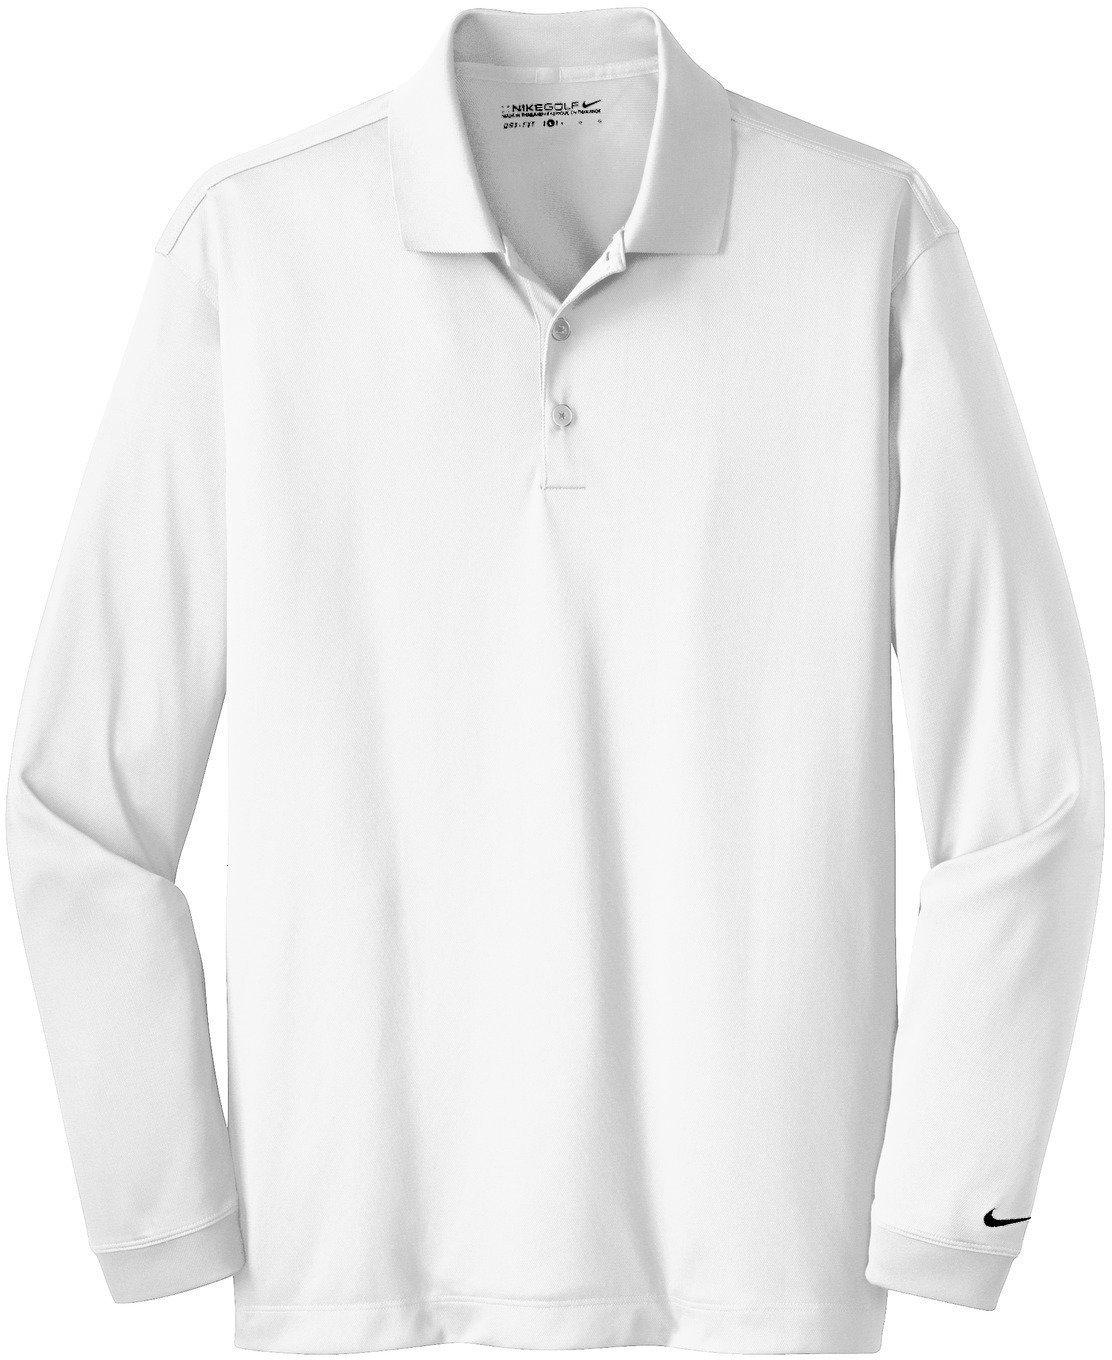 Chemise polo Nike Dry Core Polo Golf Femme Manches Longues White/Black XS